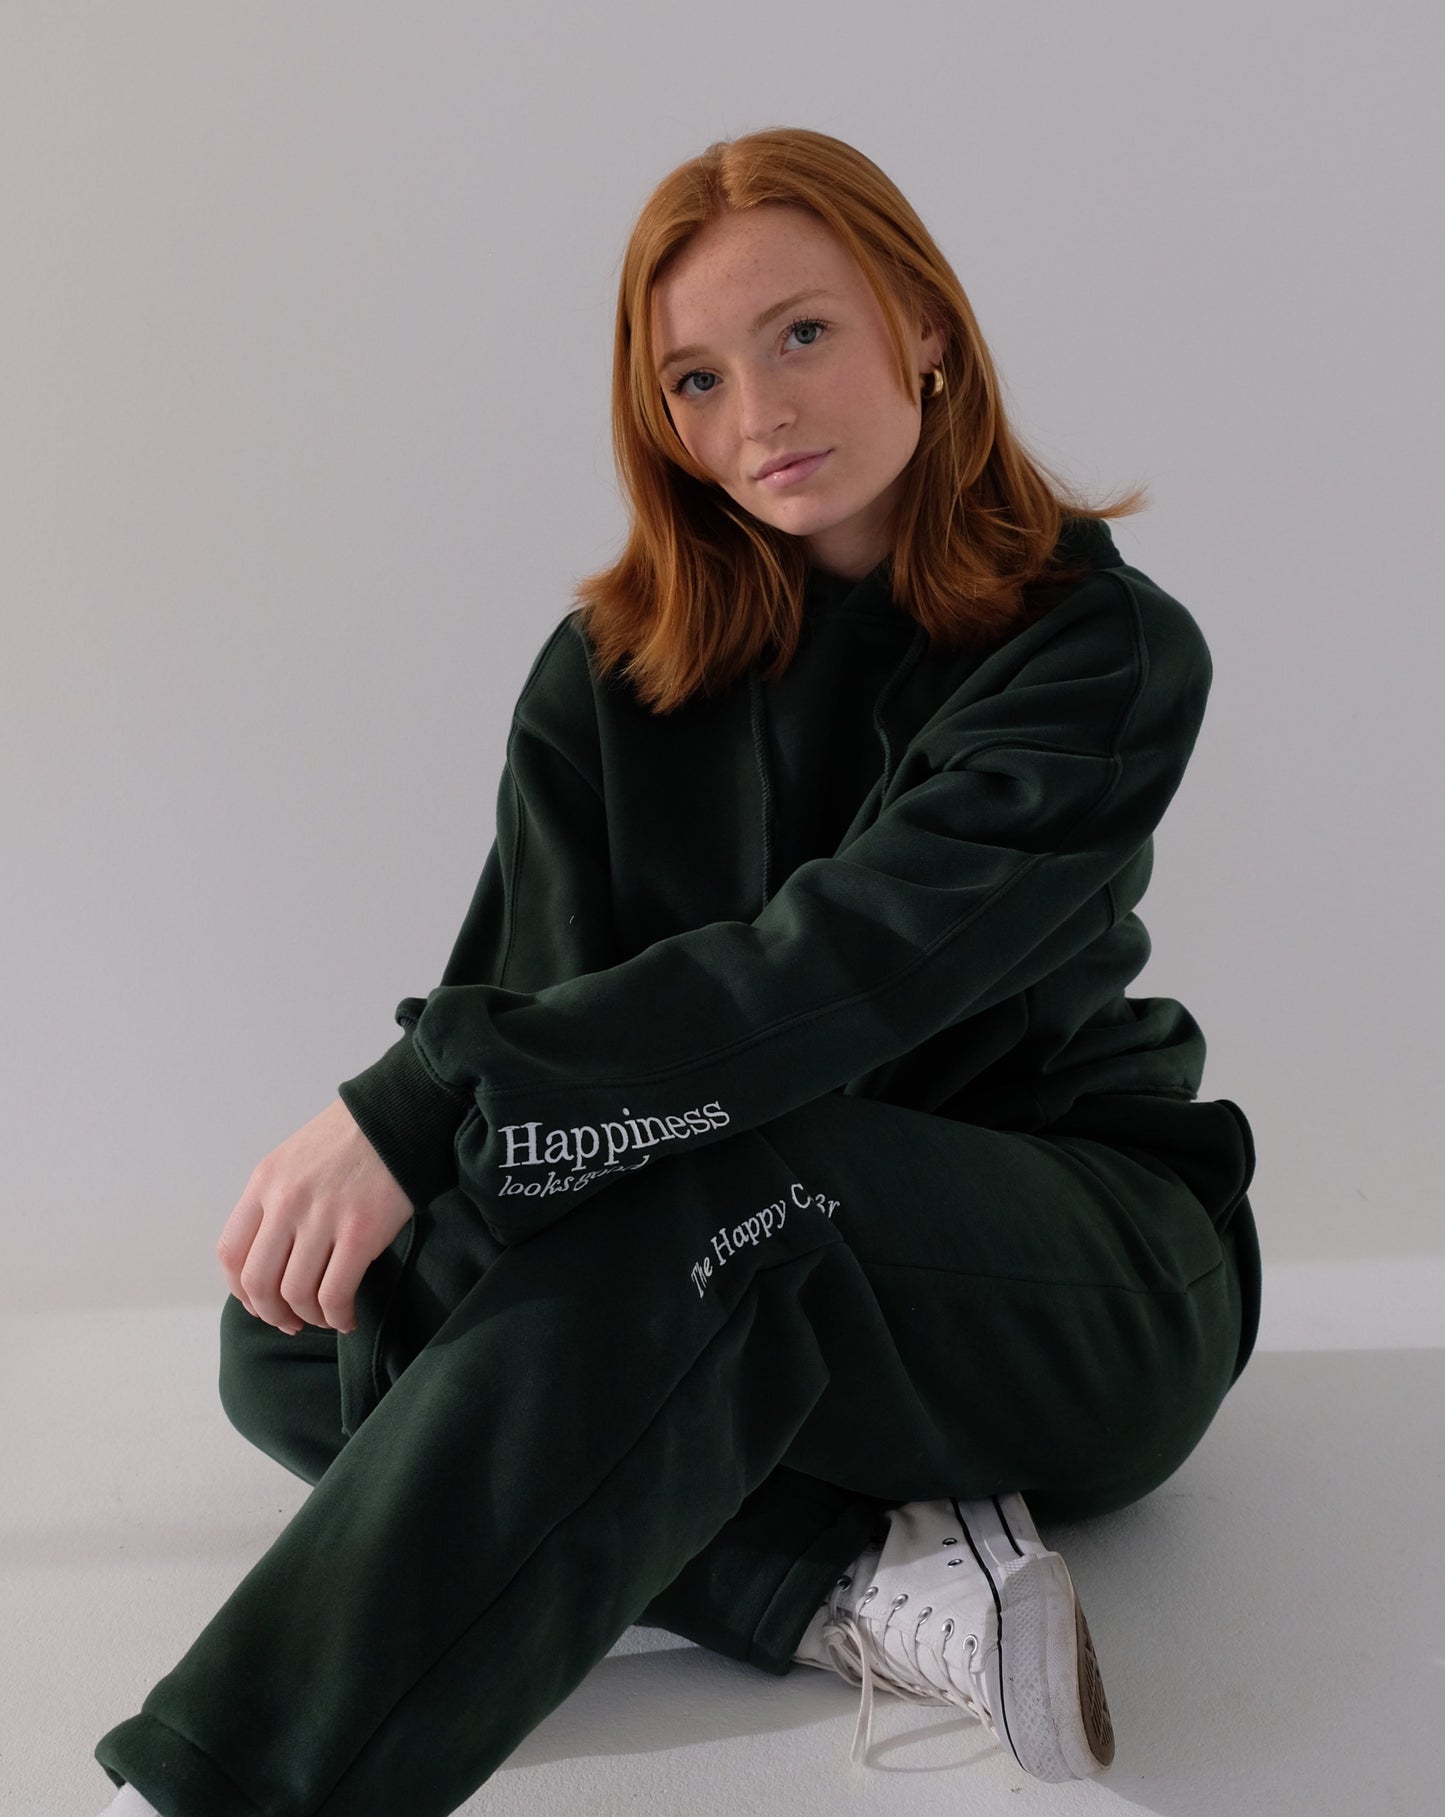 Happiness Hoodie - Forest Green